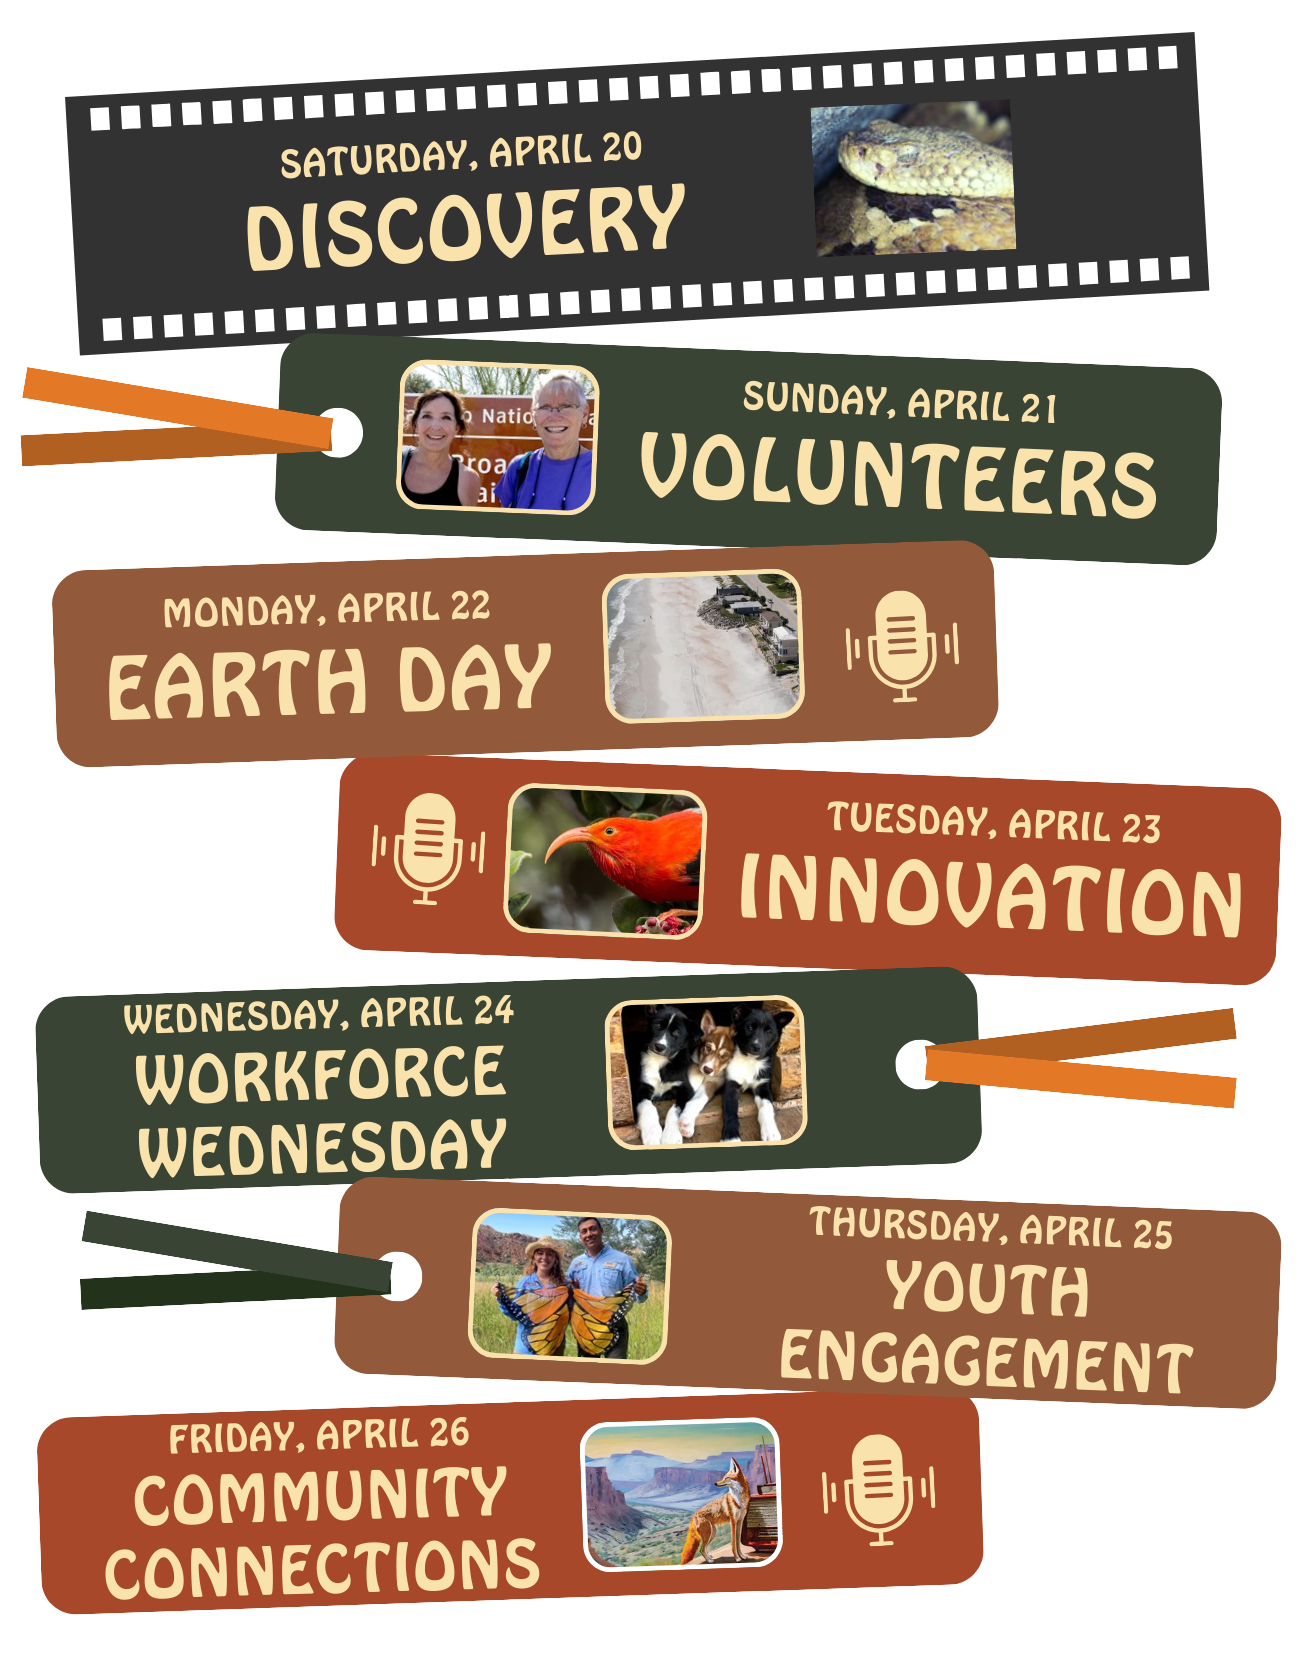 A graphic with links to stories for each day from April 20 to April 26